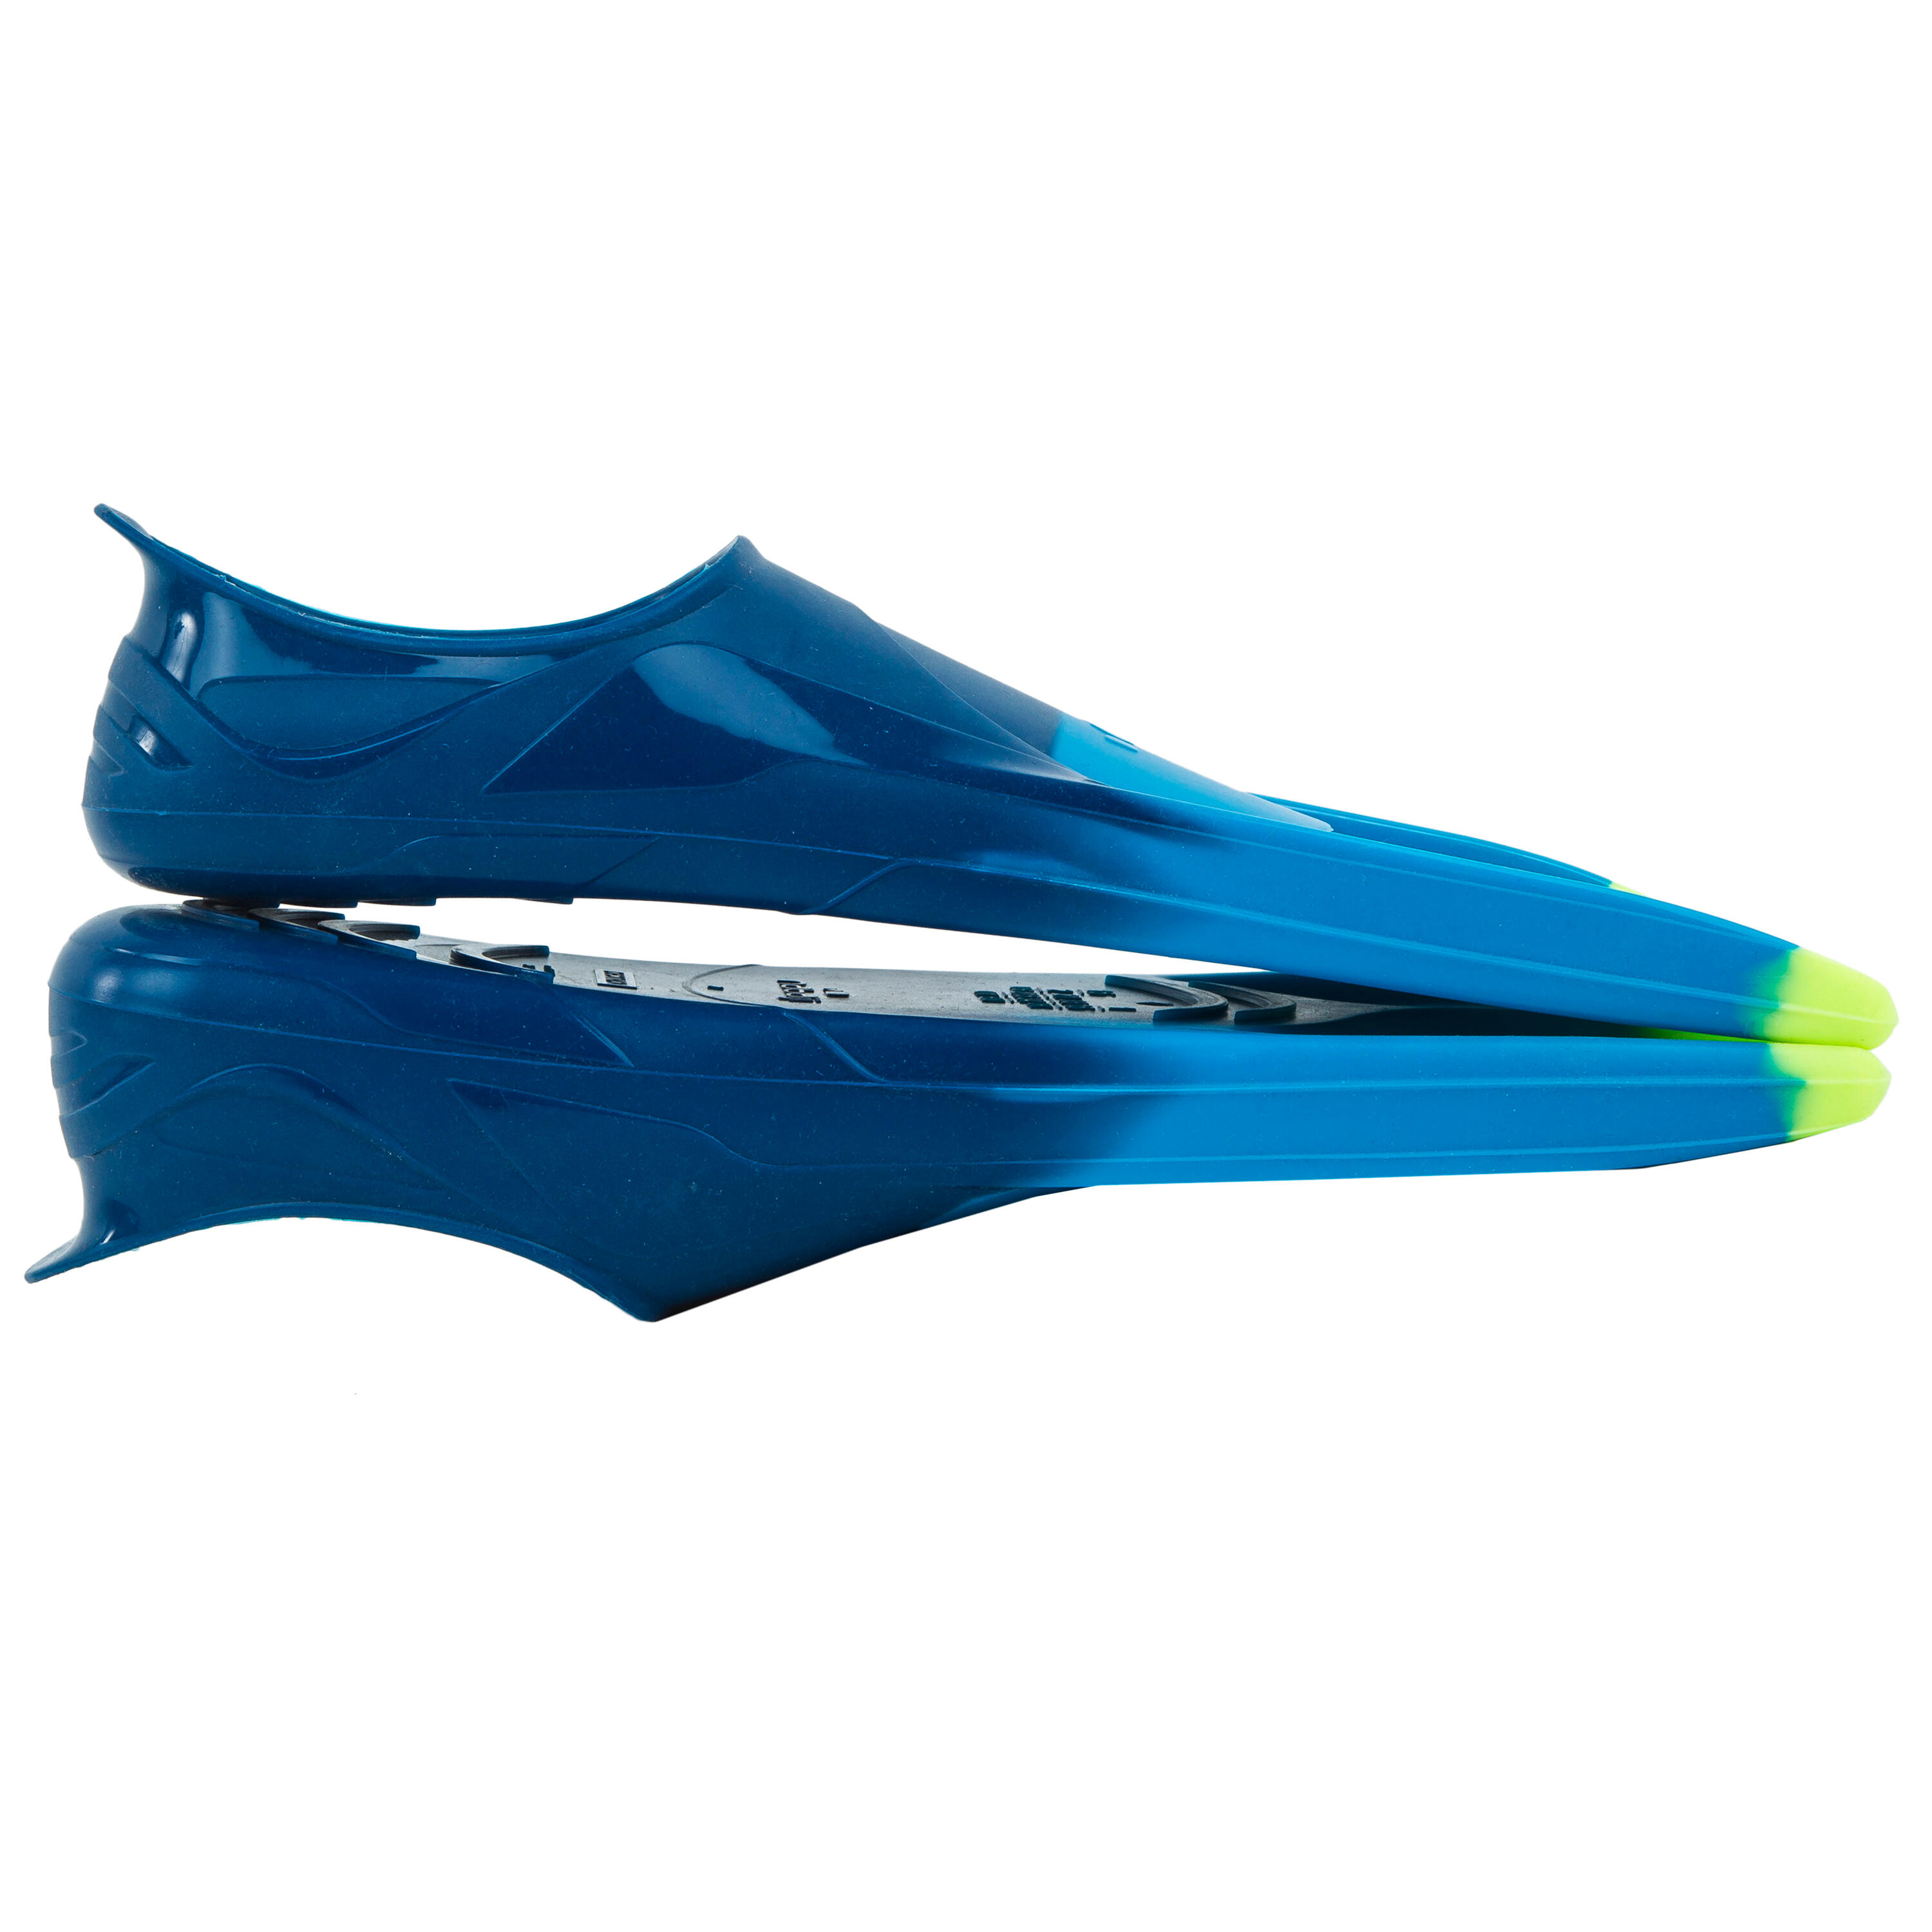 SILIFINS 500 SHORT SWIMMING FINS - 3 COLOURS NAVY BLUE/ BLUE/YELLOW 5/7